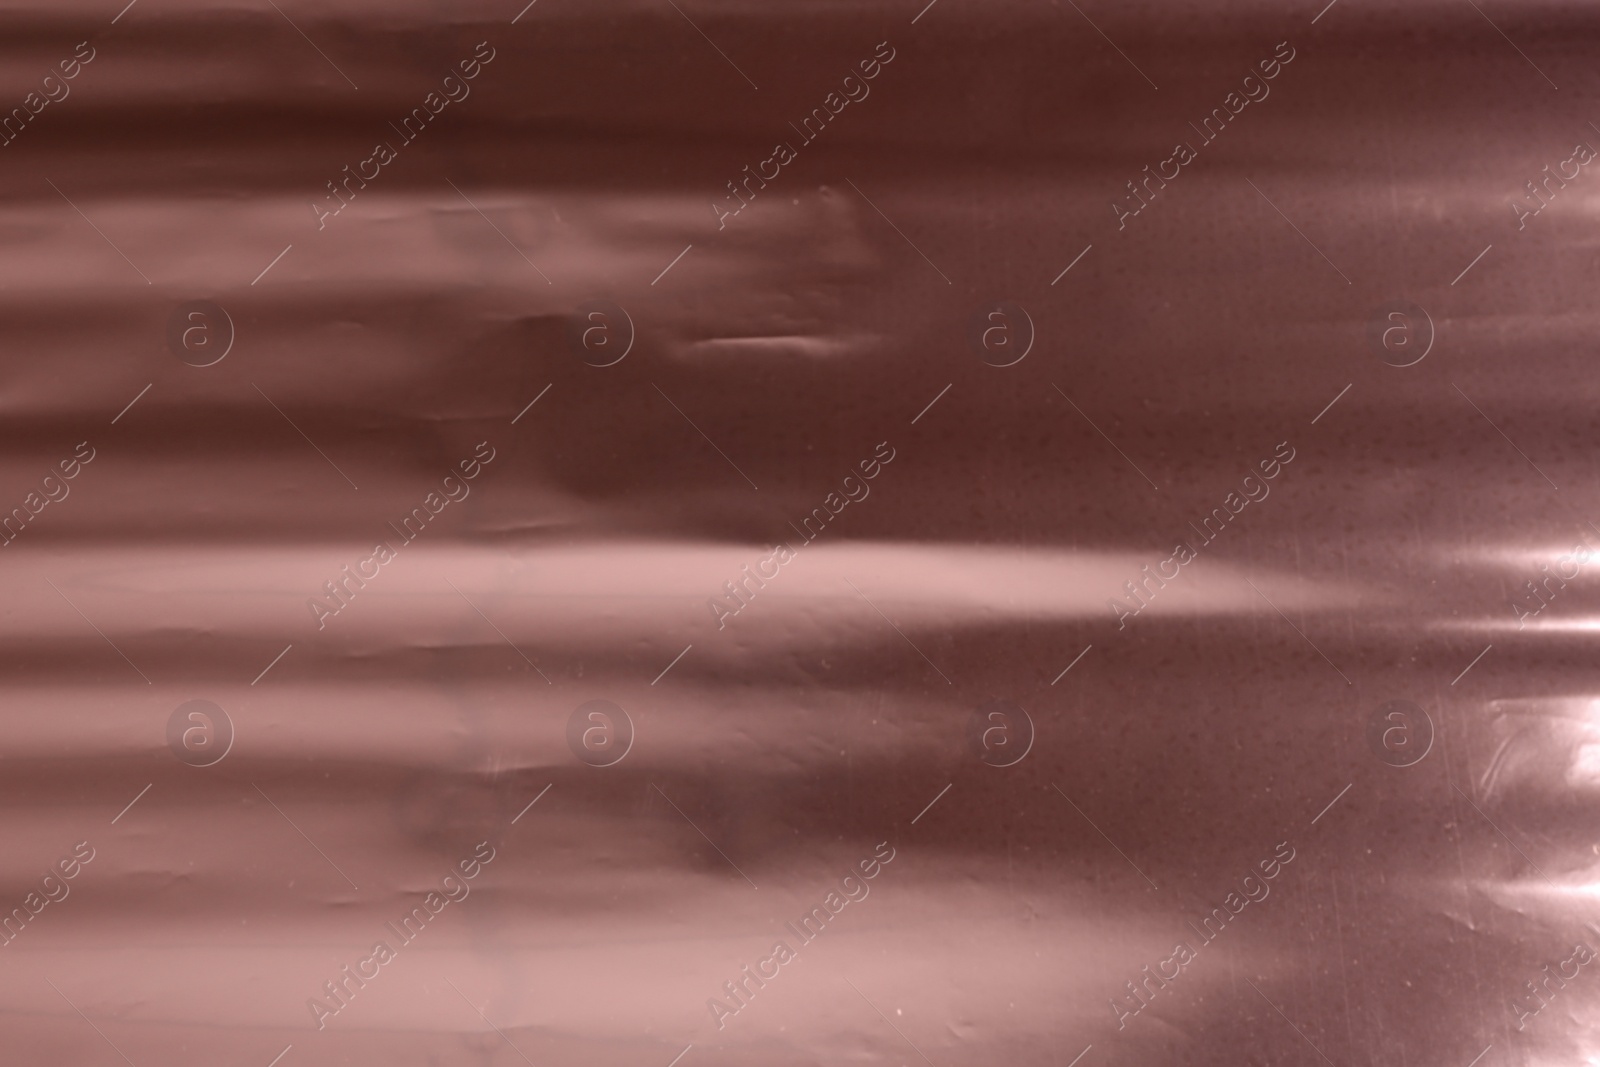 Photo of Plain rose gold surface as background, closeup